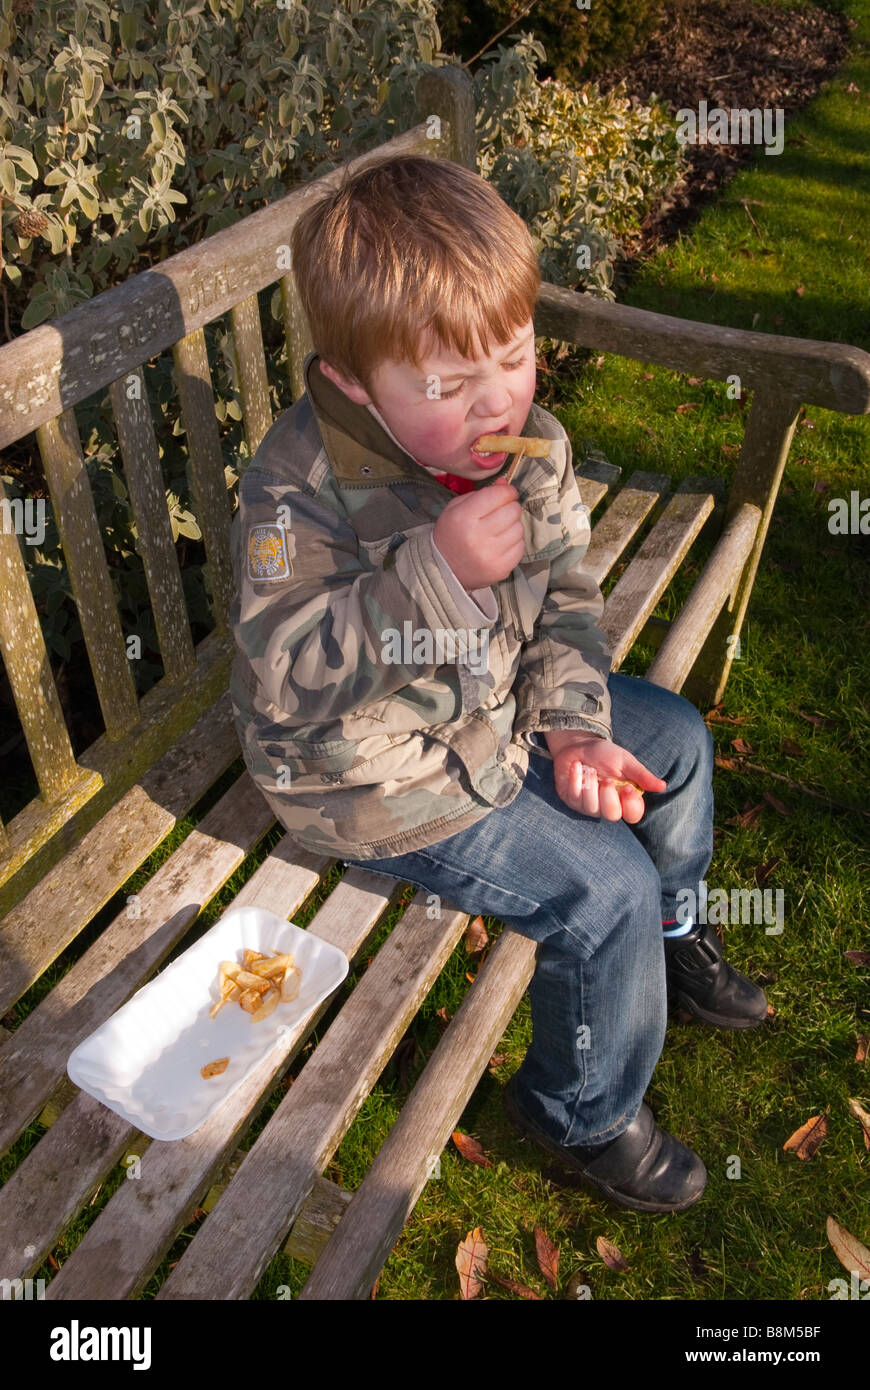 Young boy child eating his chips outdoors on a park bench Stock Photo